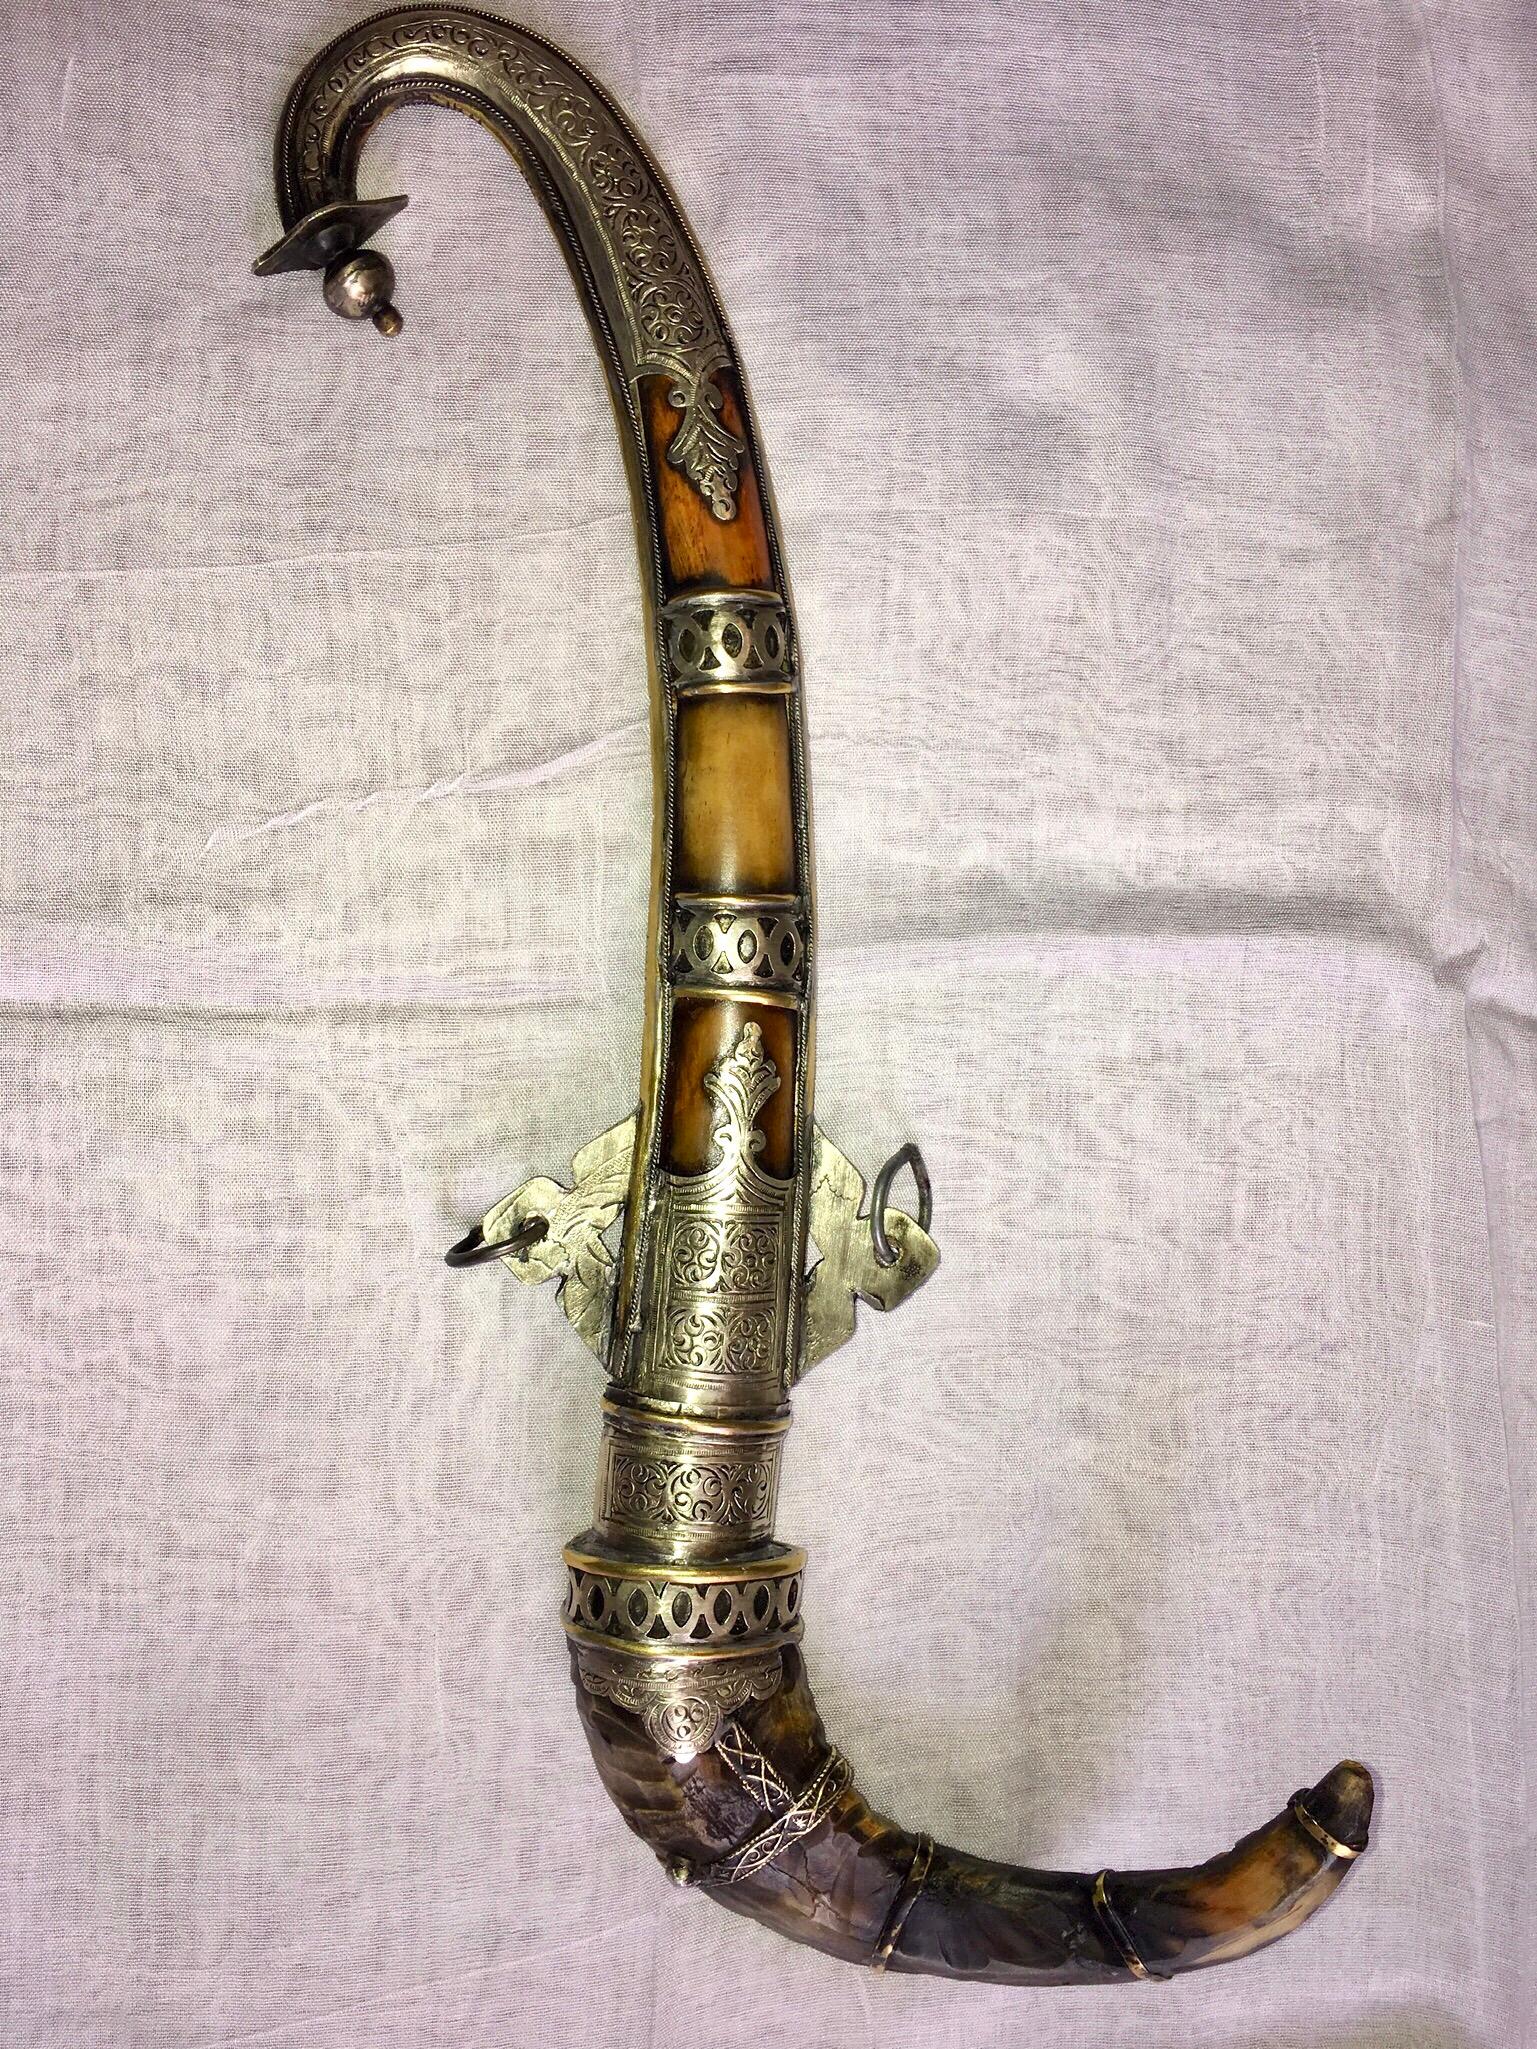 Vintage Moroccan Khanjar Dagger Knife Curved Blade Weapon Bone, Horn, Silver In Good Condition For Sale In Vineyard Haven, MA